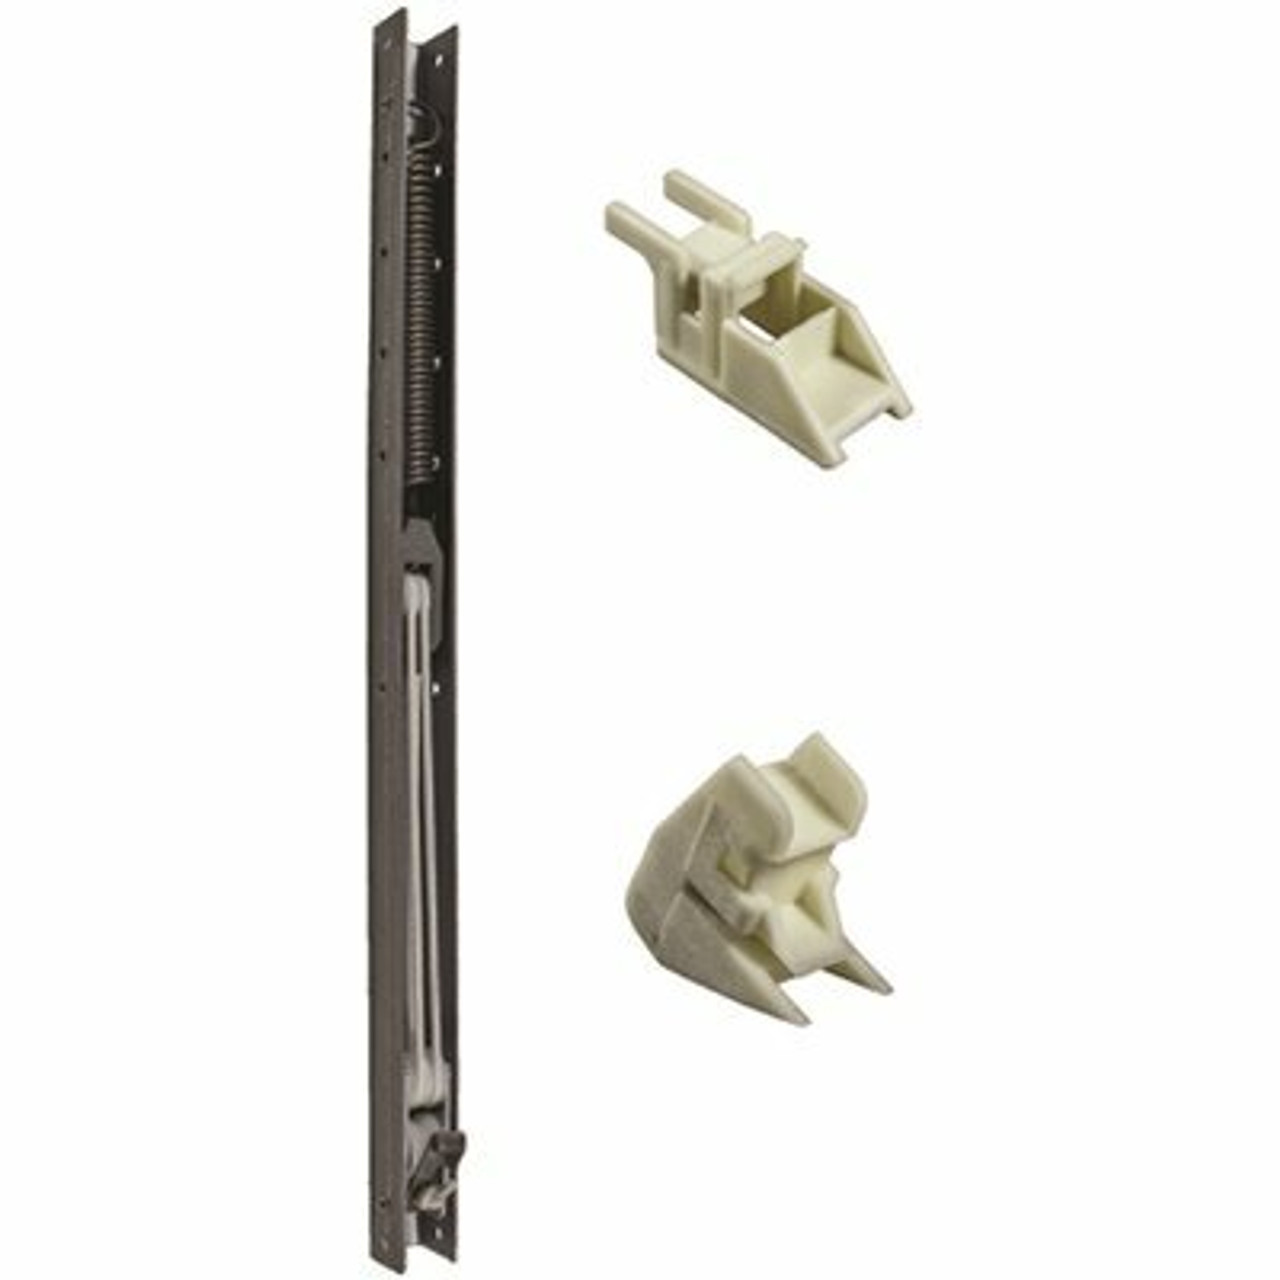 31 In. L Window Channel Balance 3040 With Top And Bottom End Brackets Attached 9/16 In. W X 5/8 In. D (Pack Of 8)